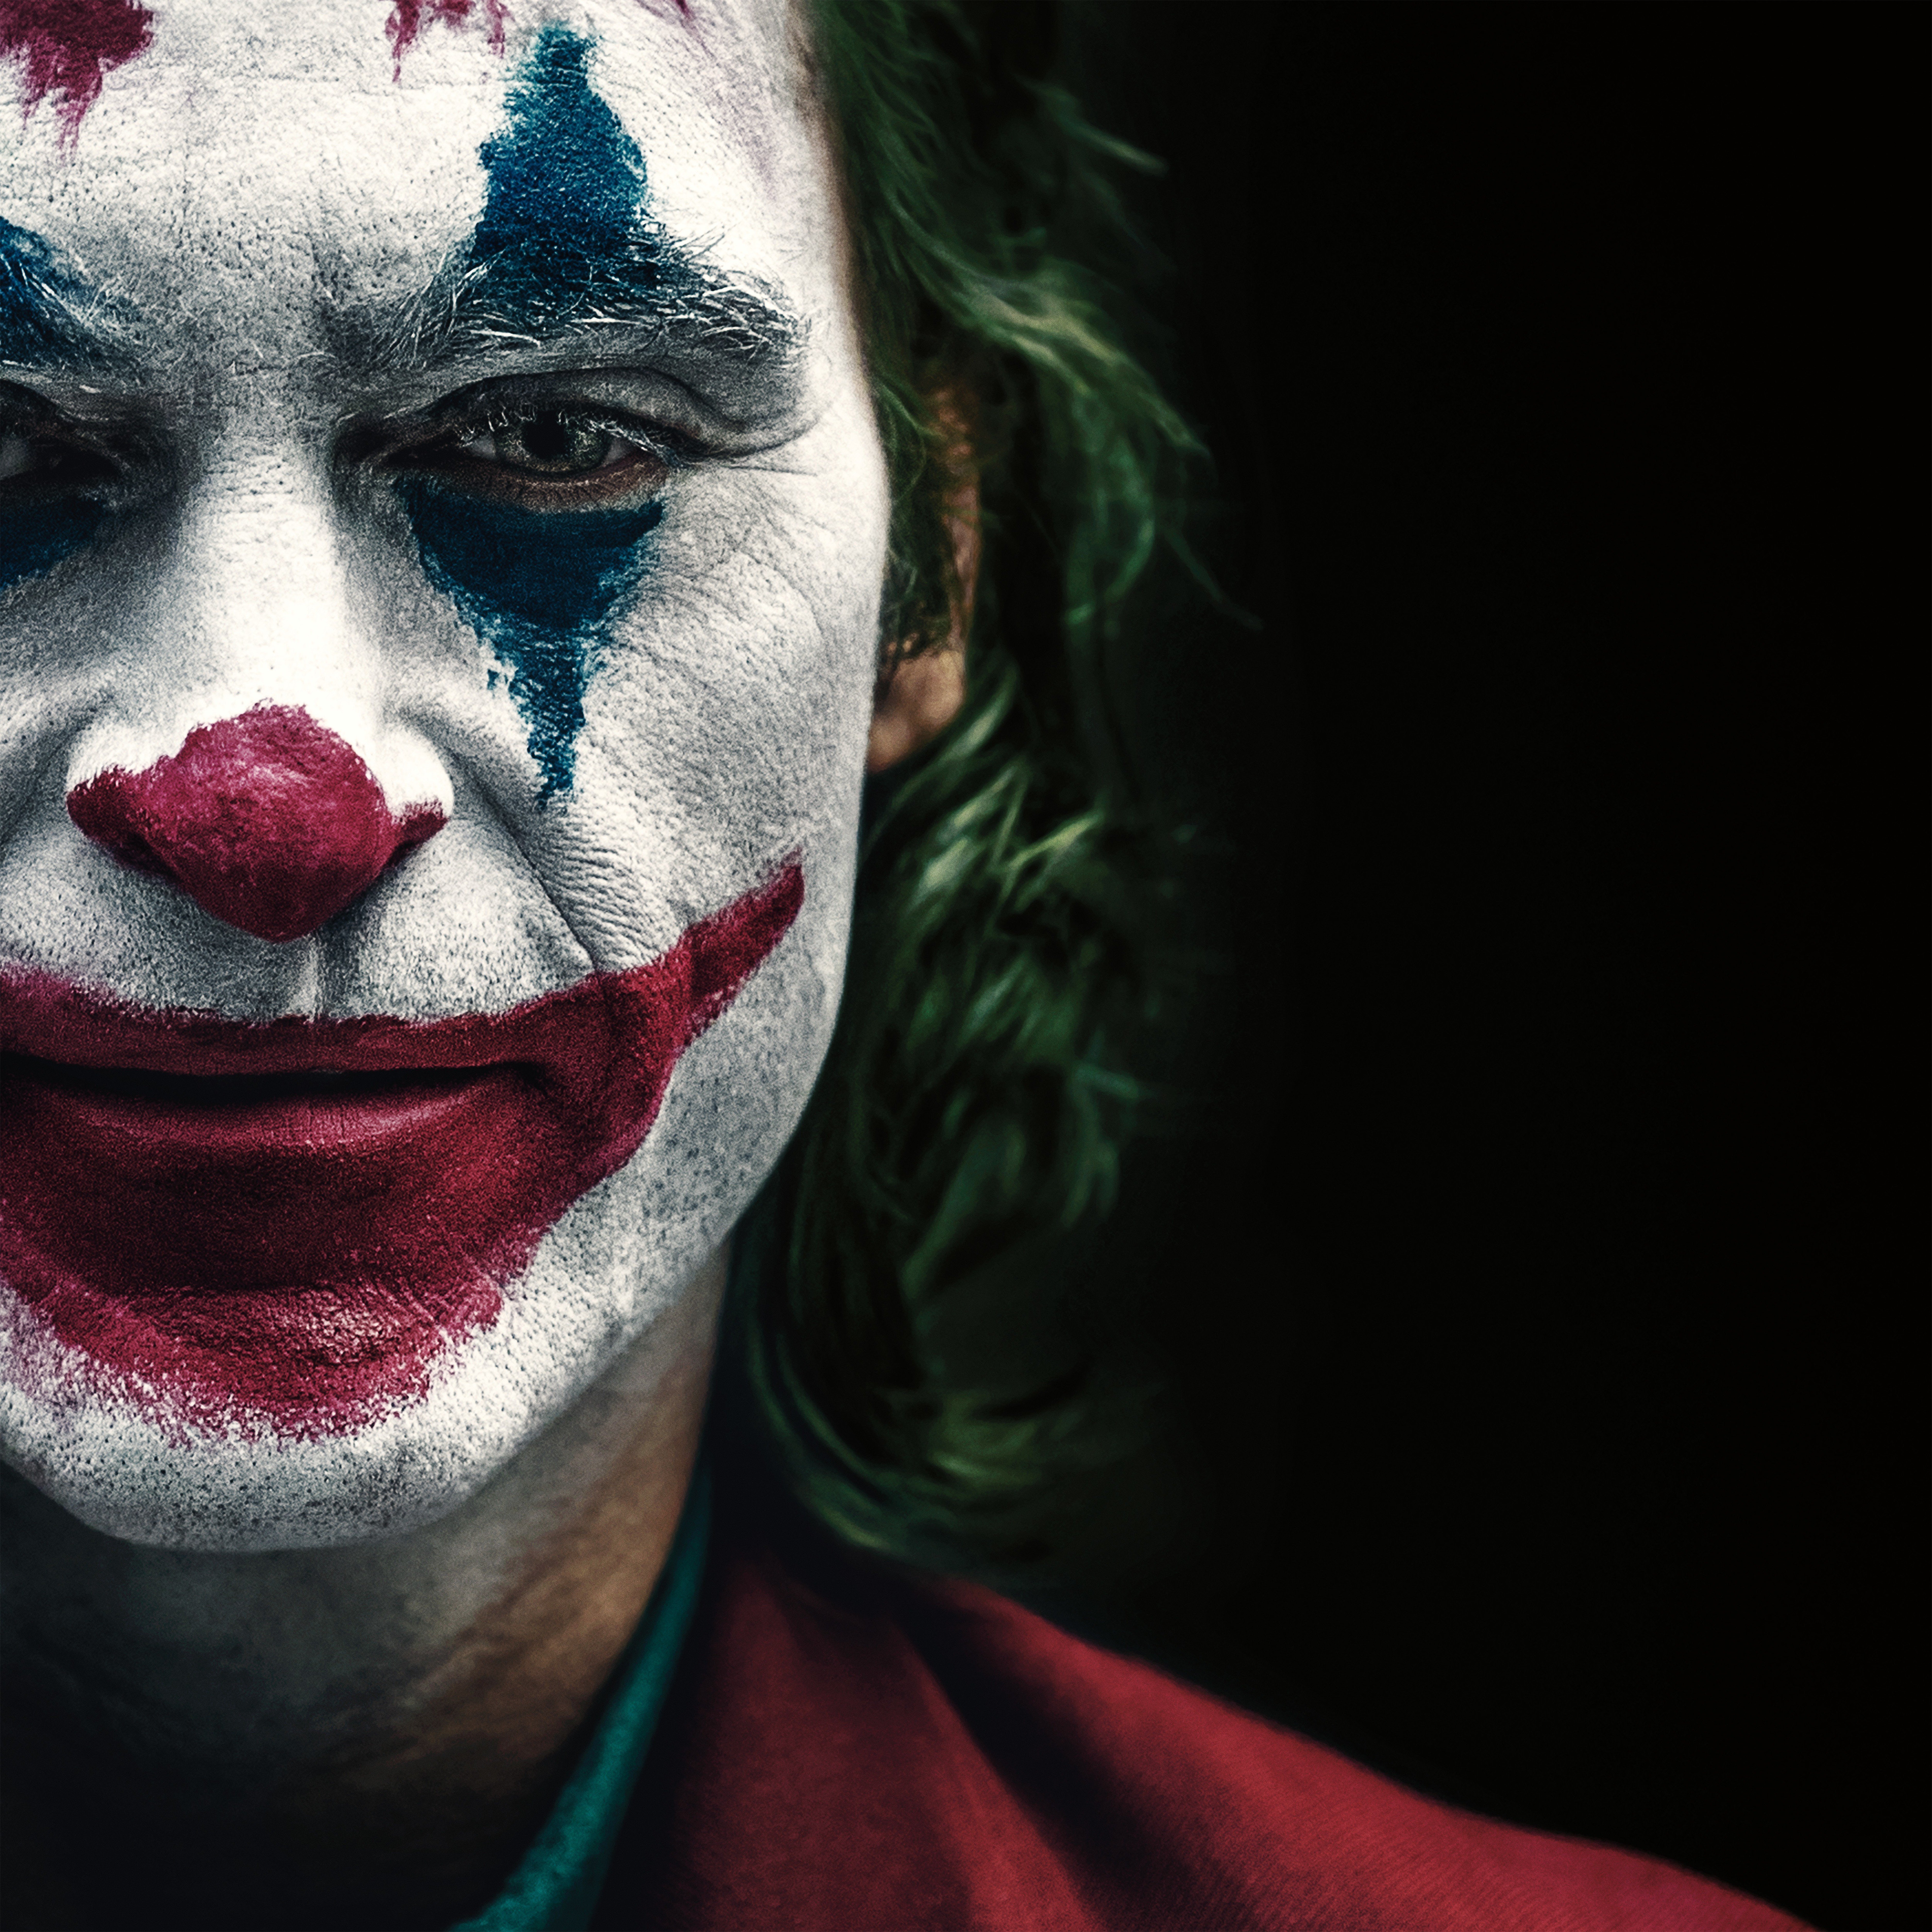 Joaquin Phoenix’s performance in the eponymous role of the Joker has attracted early rave reactions from critics and film-goers – and is already being tipped for glory come awards season.